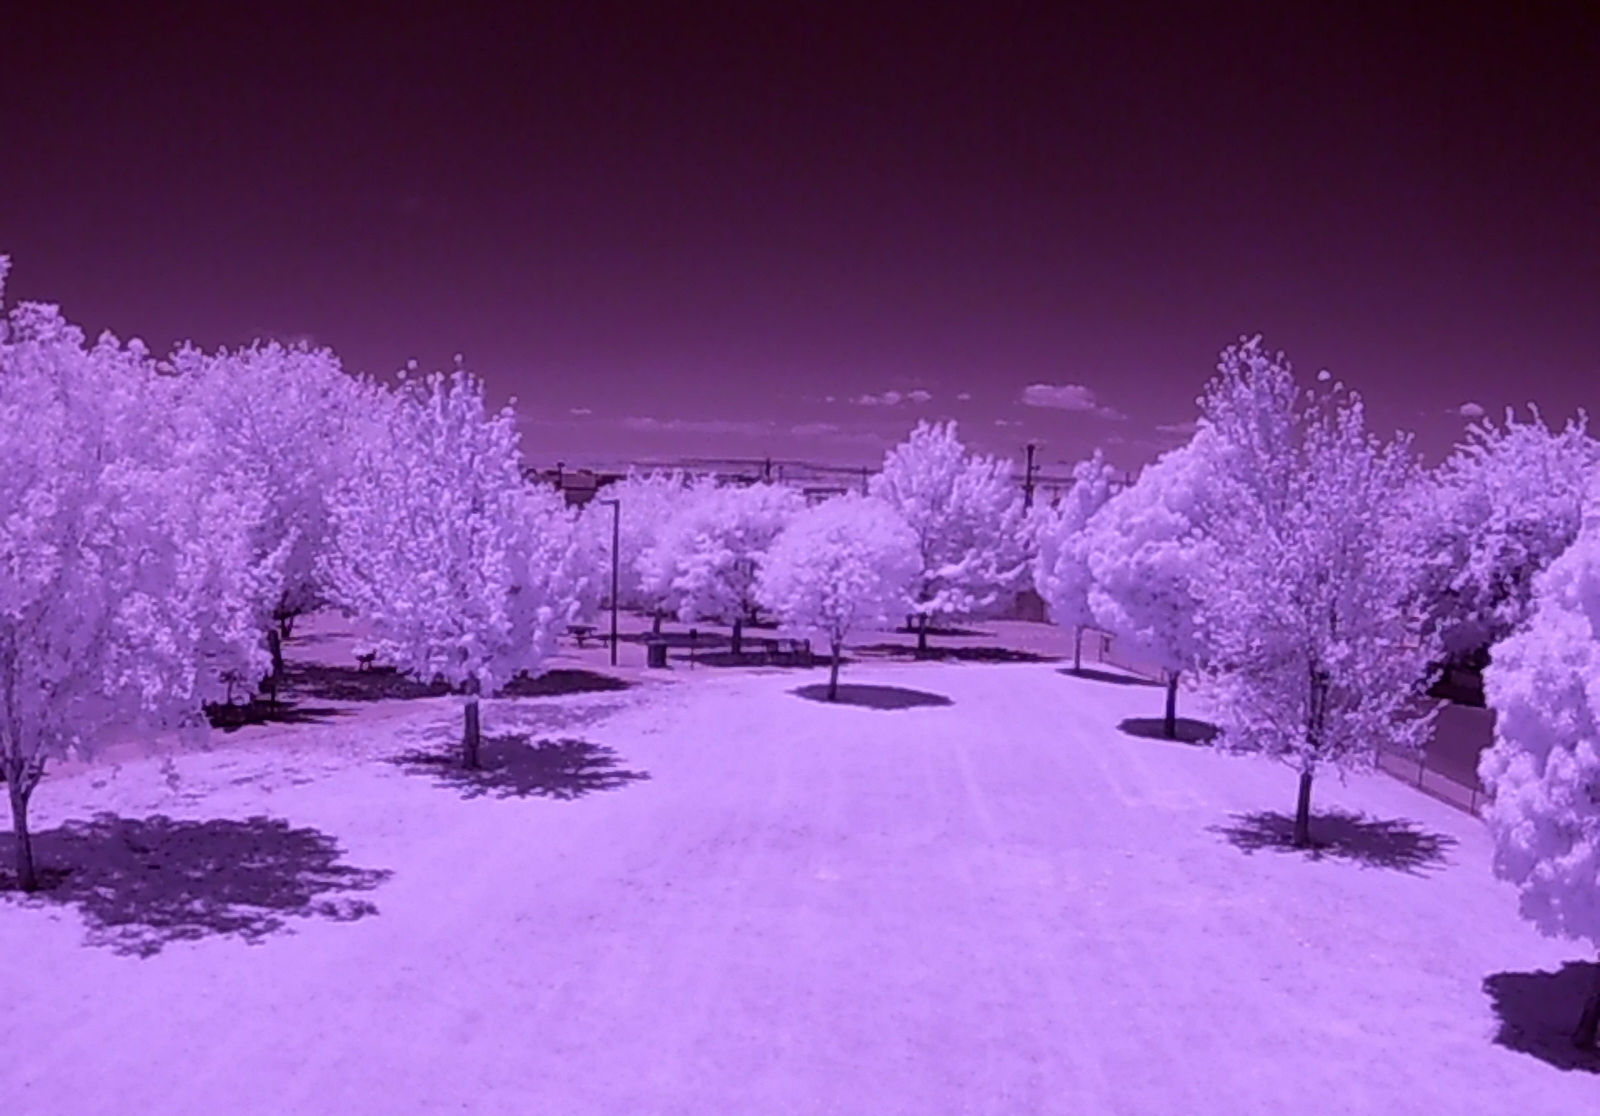 Bel-Air park in Albuquerque, NM, facing west, photographed with the IR modified Holystone F181G camera